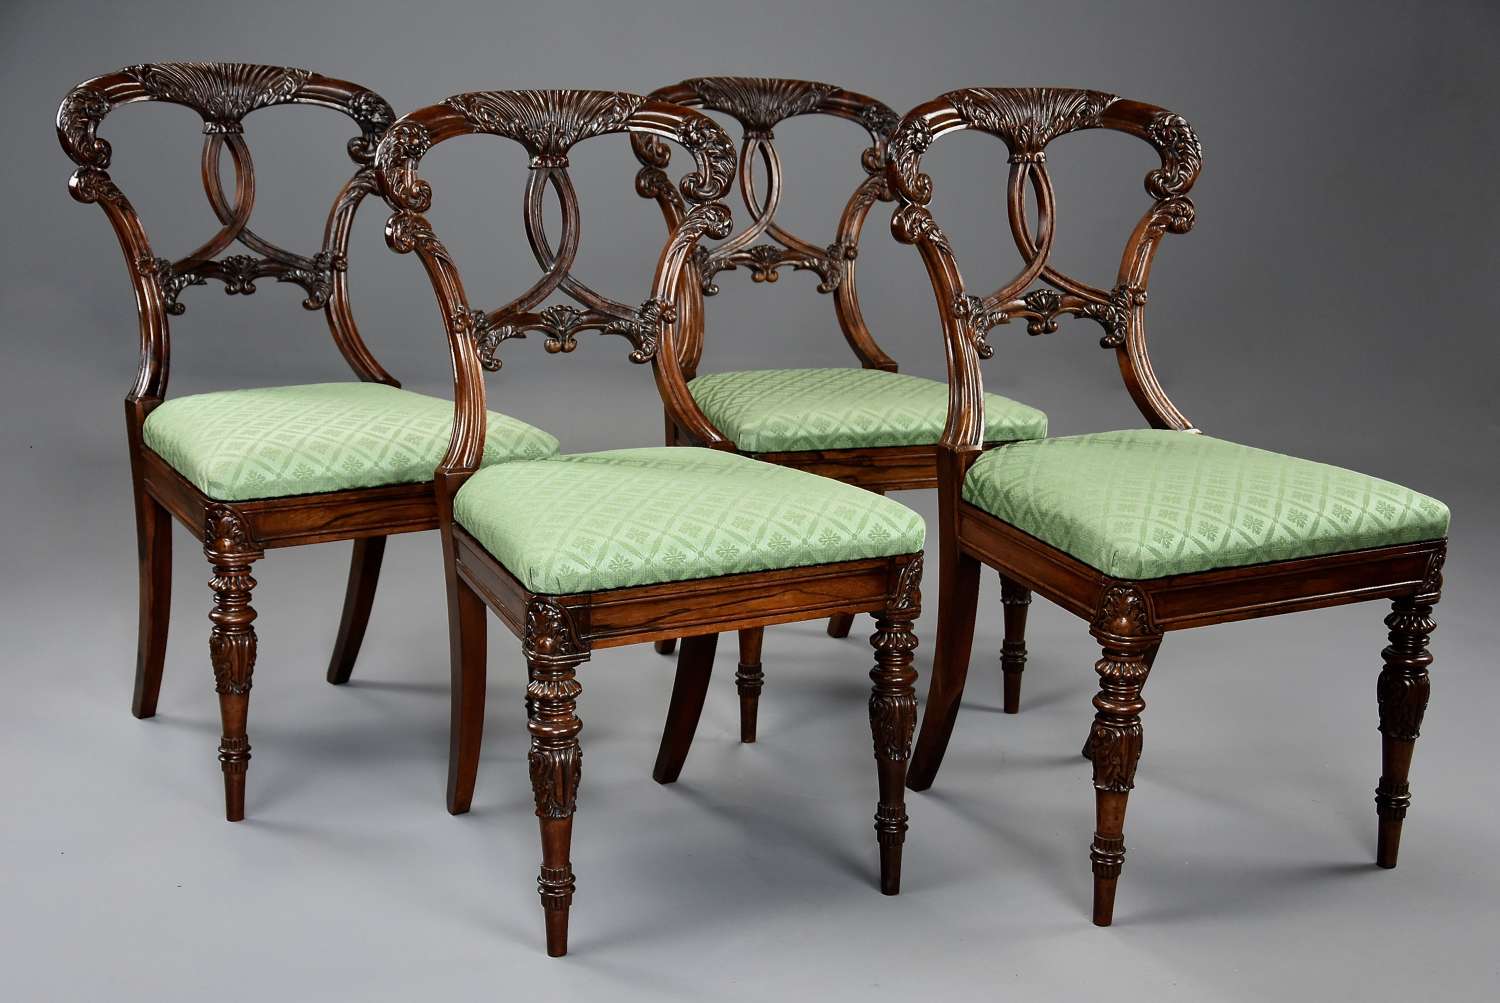 Superb quality set of four rosewood chairs of Indian influence